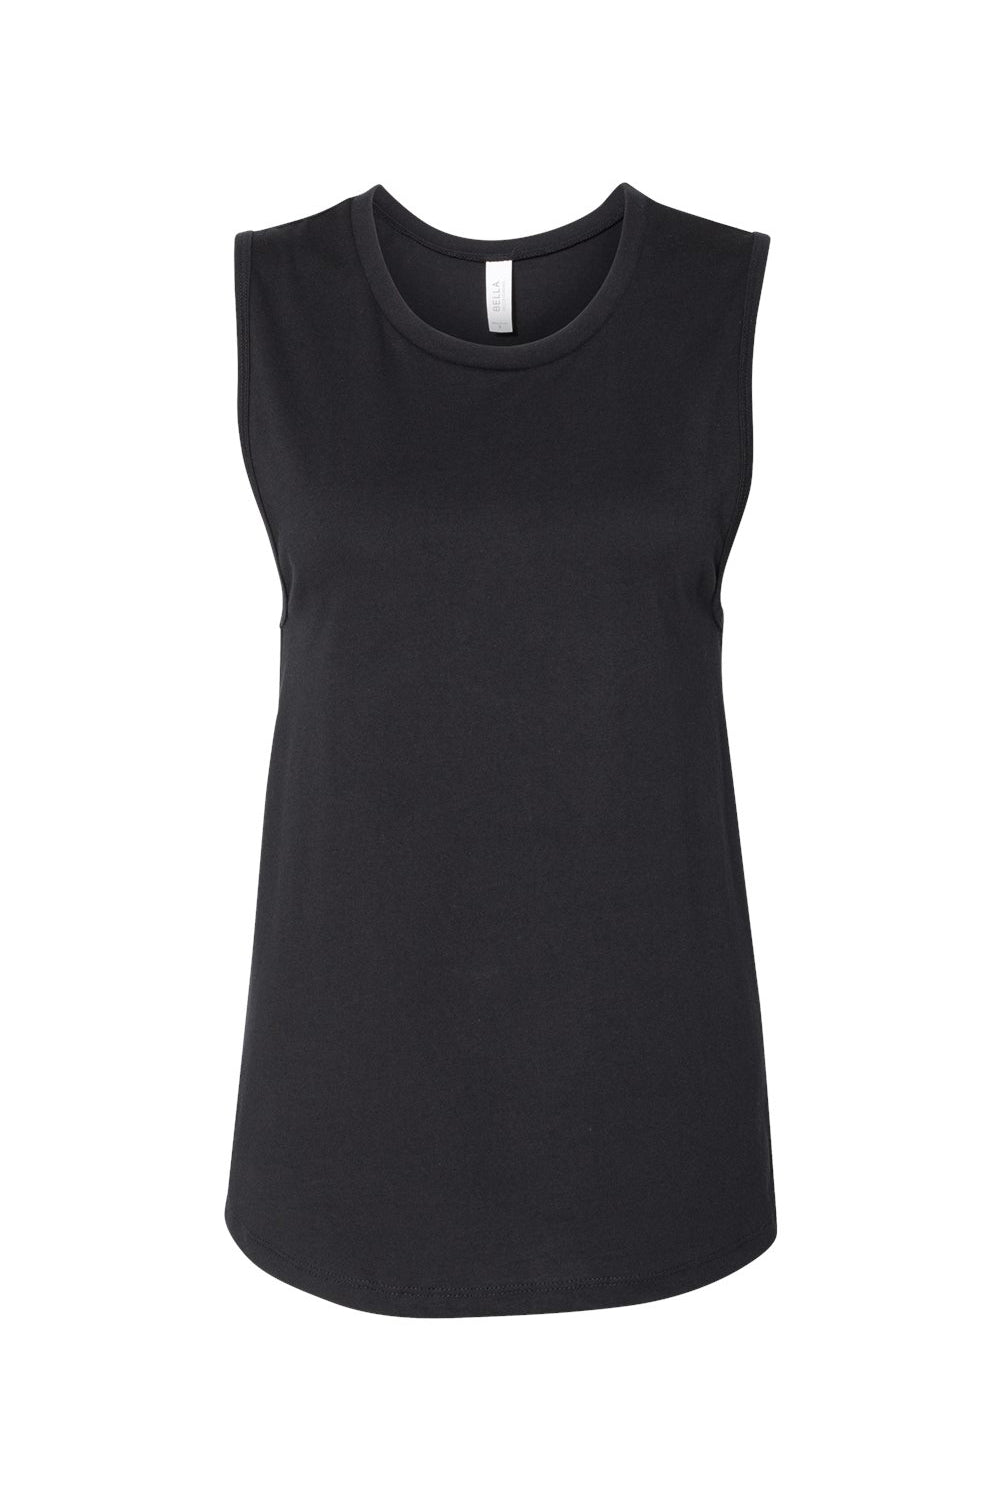 Bella + Canvas BC6003/B6003/6003 Womens Jersey Muscle Tank Top Black Flat Front